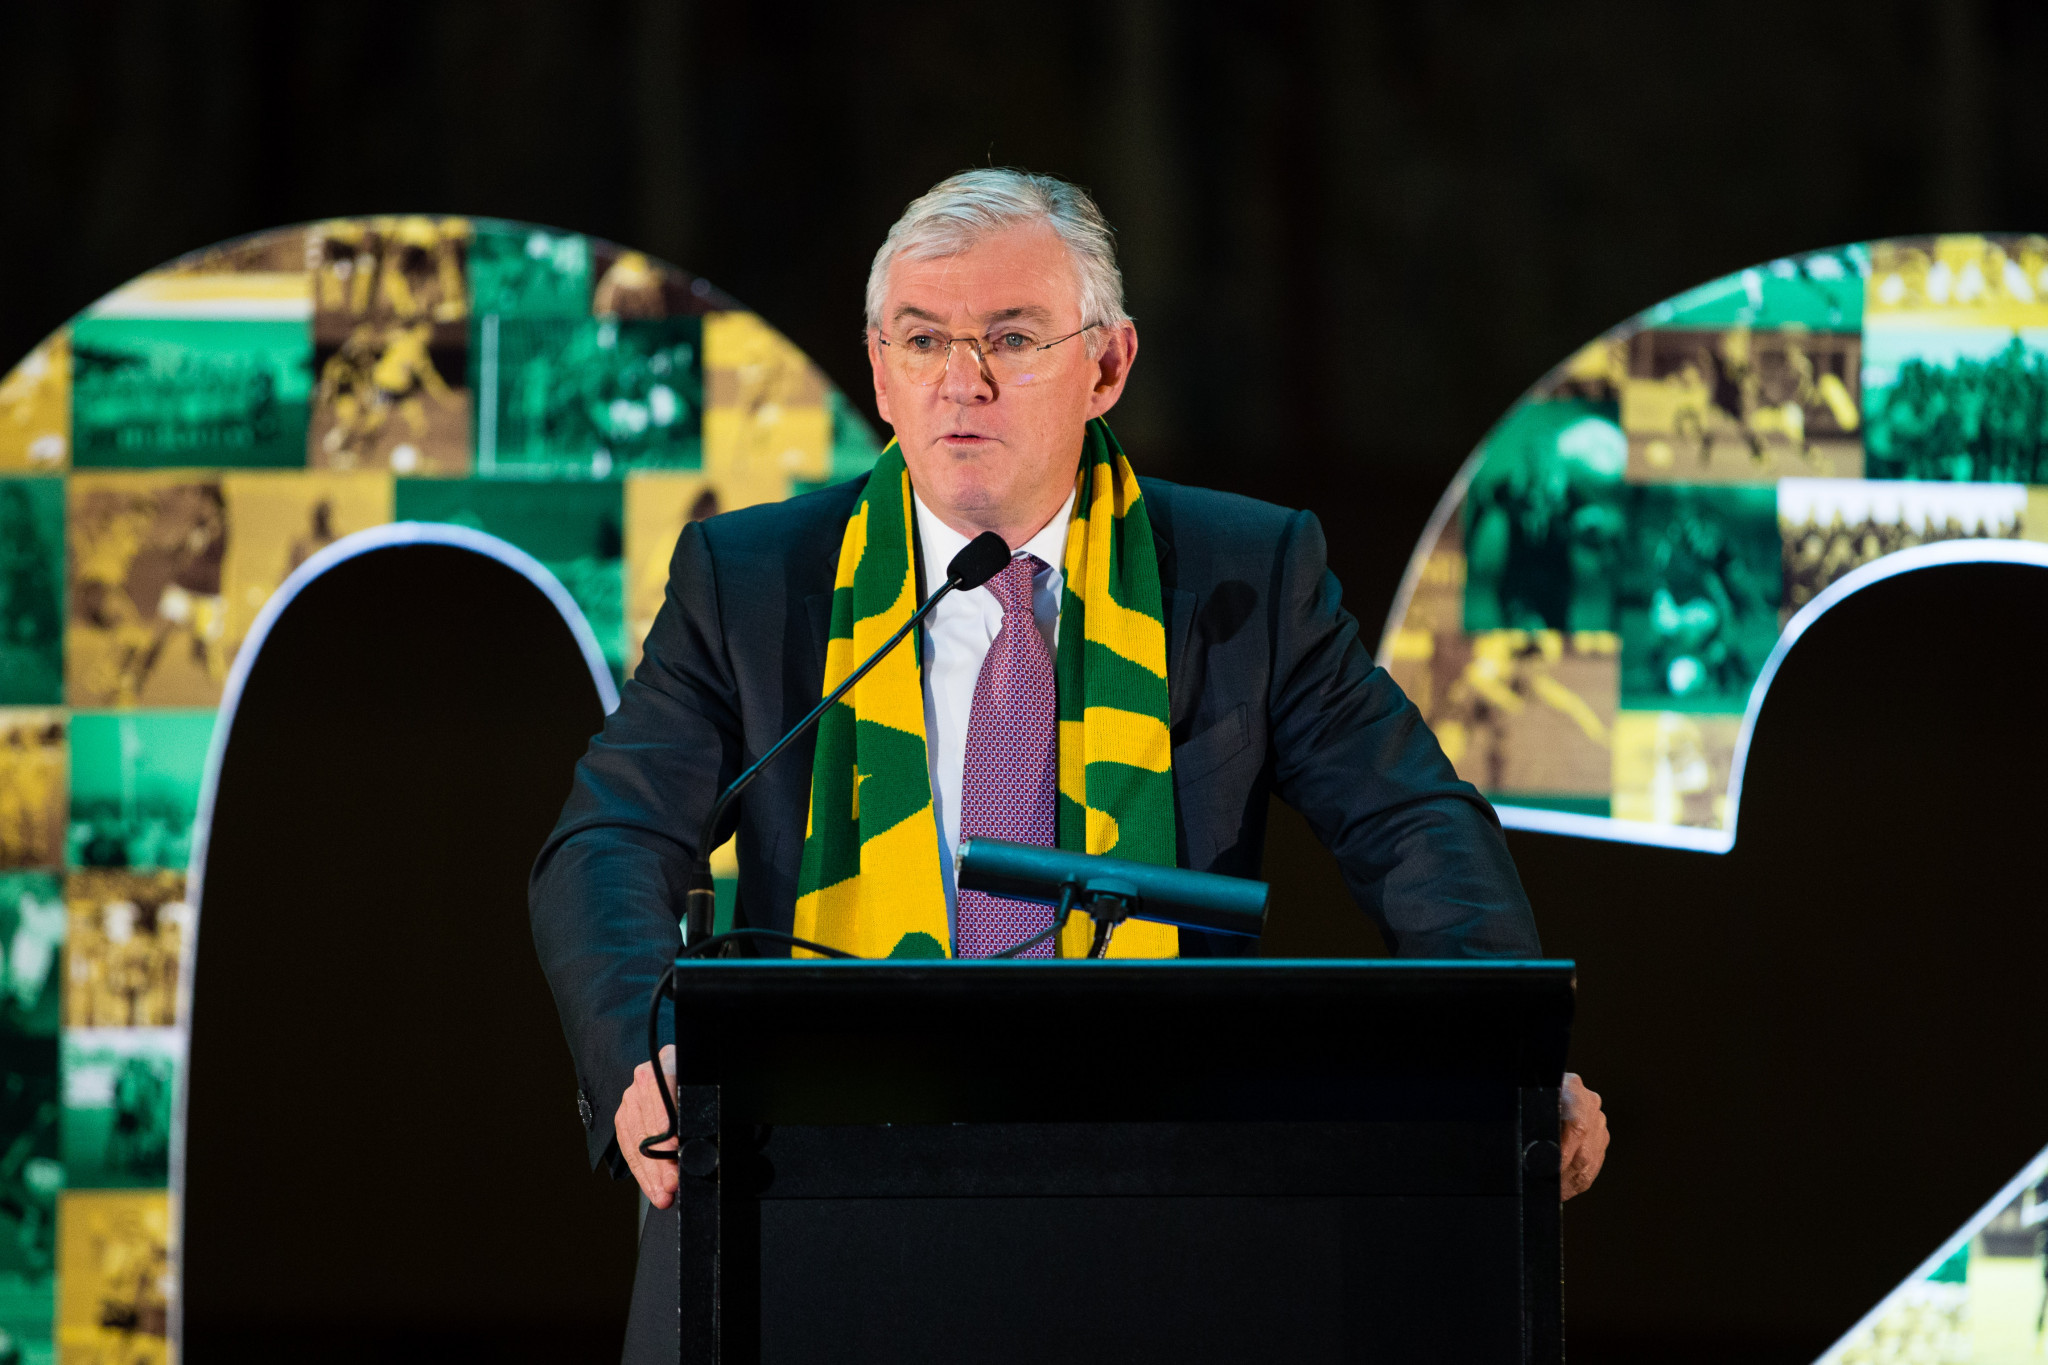 FFA chairman Steven Lowry is under pressure to find a solution with the game's governance in Australia under the microscope ©Getty Images